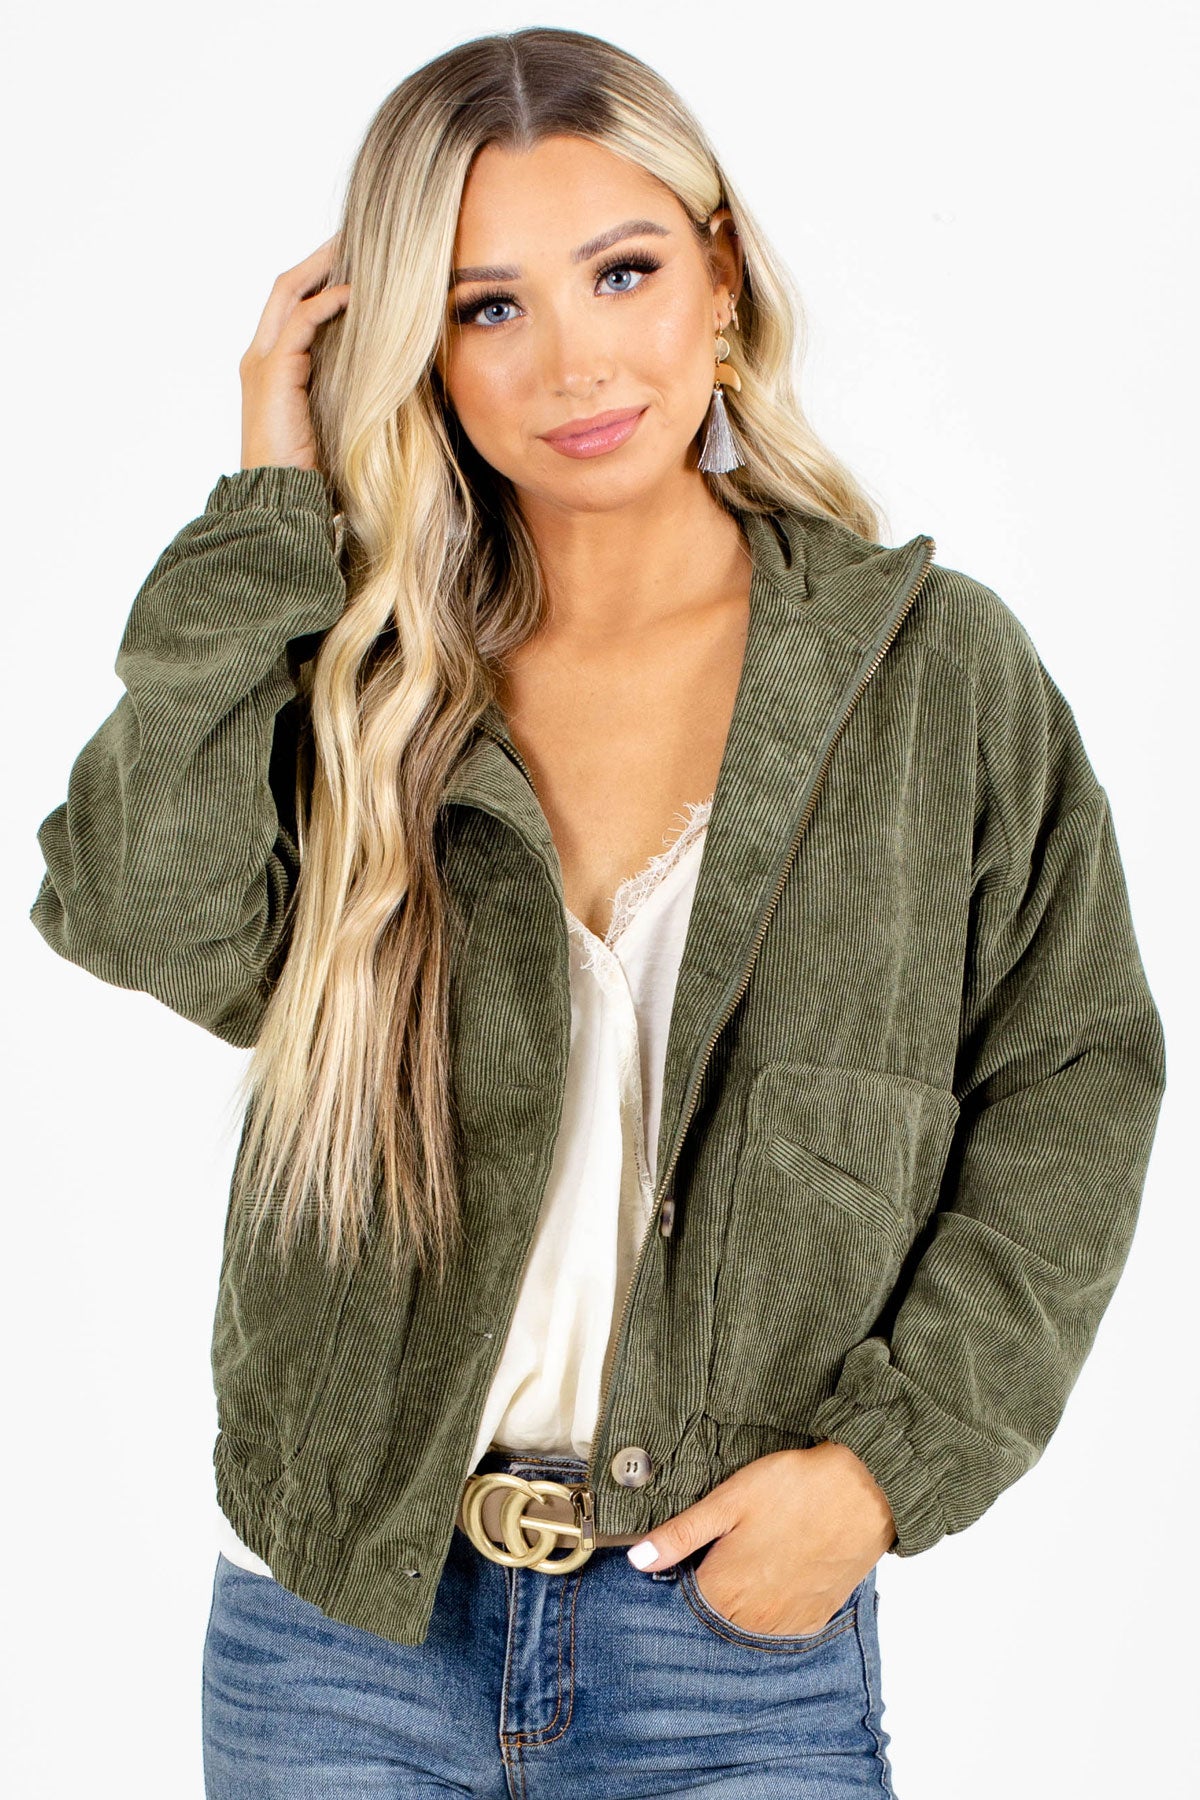 White Cute and Comfortable Boutique Jackets for Women